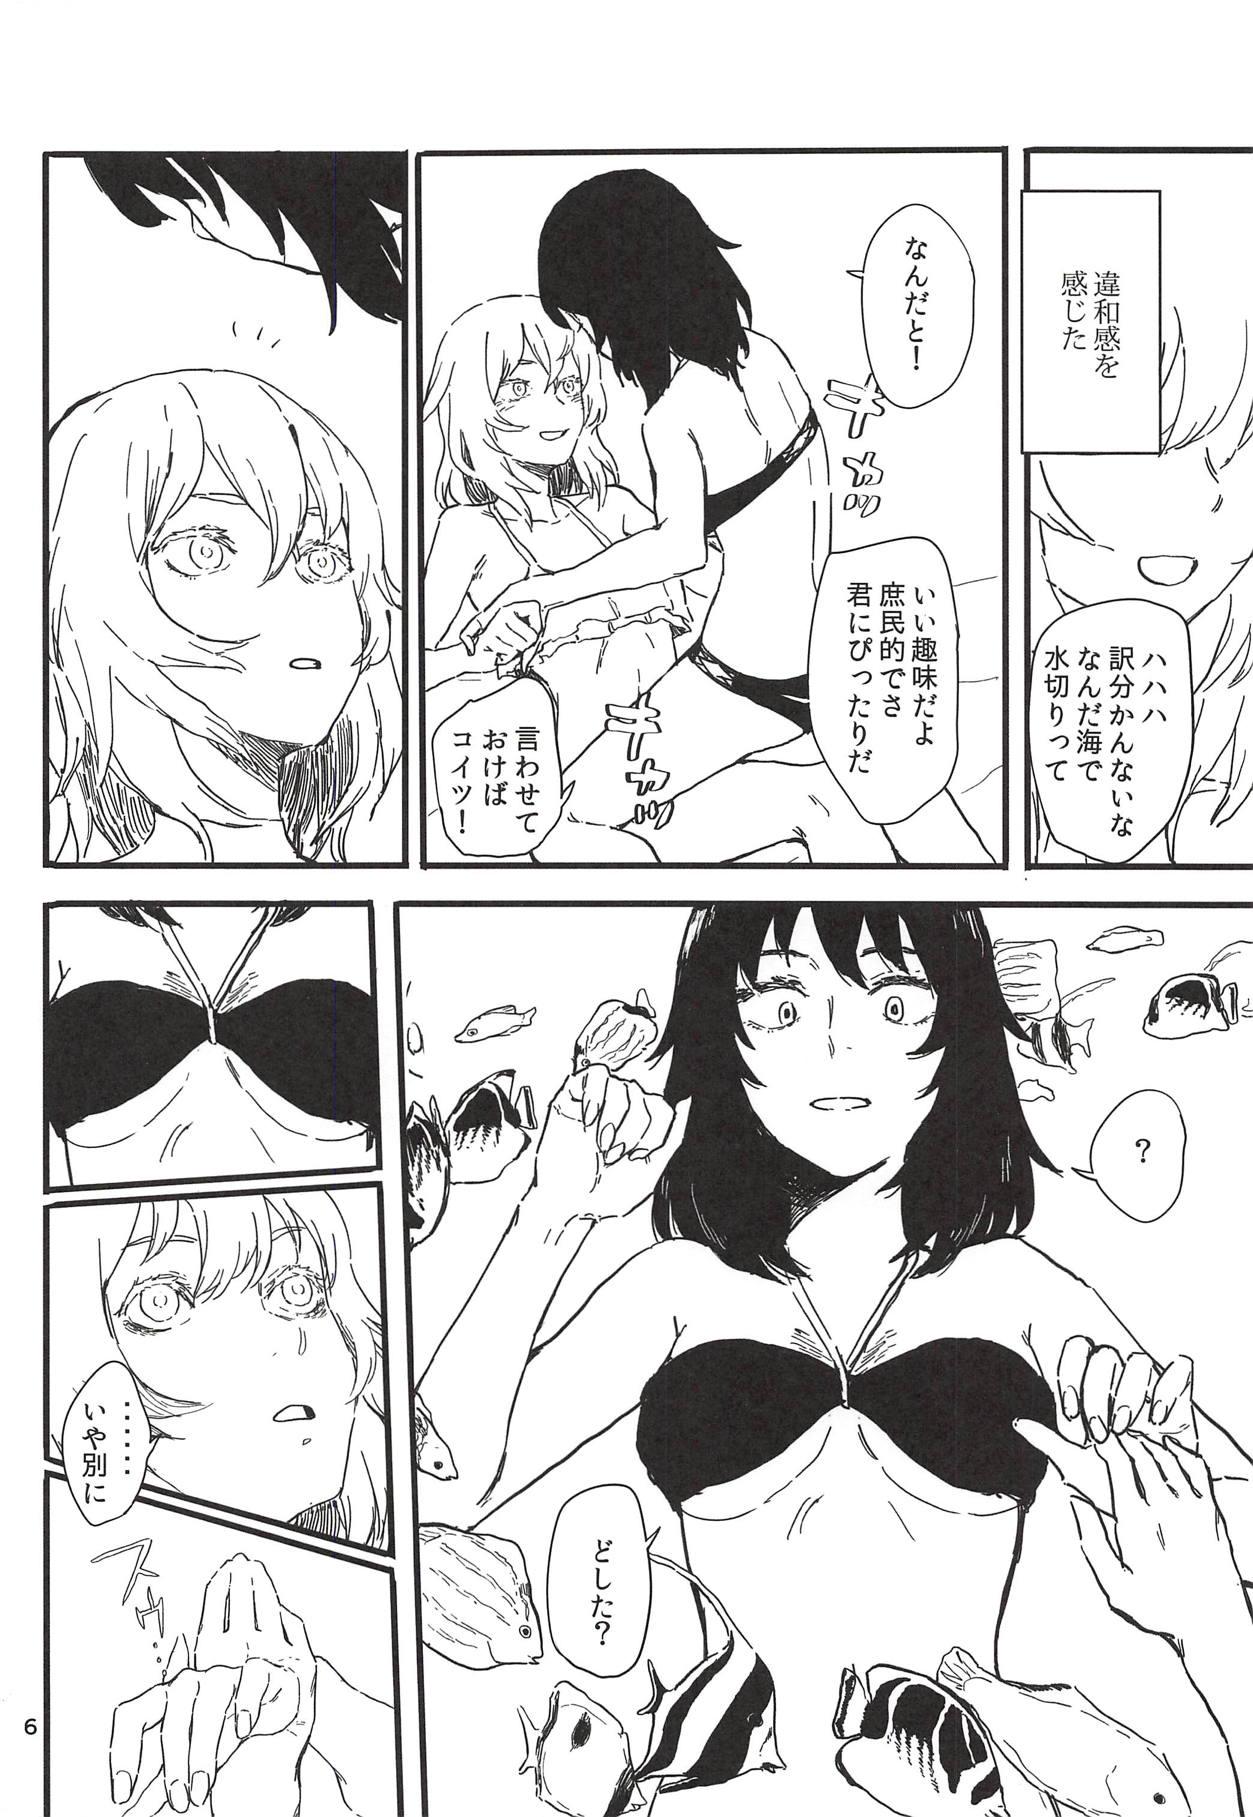 Pounded HAWAII - Girls und panzer Wrestling - Page 5